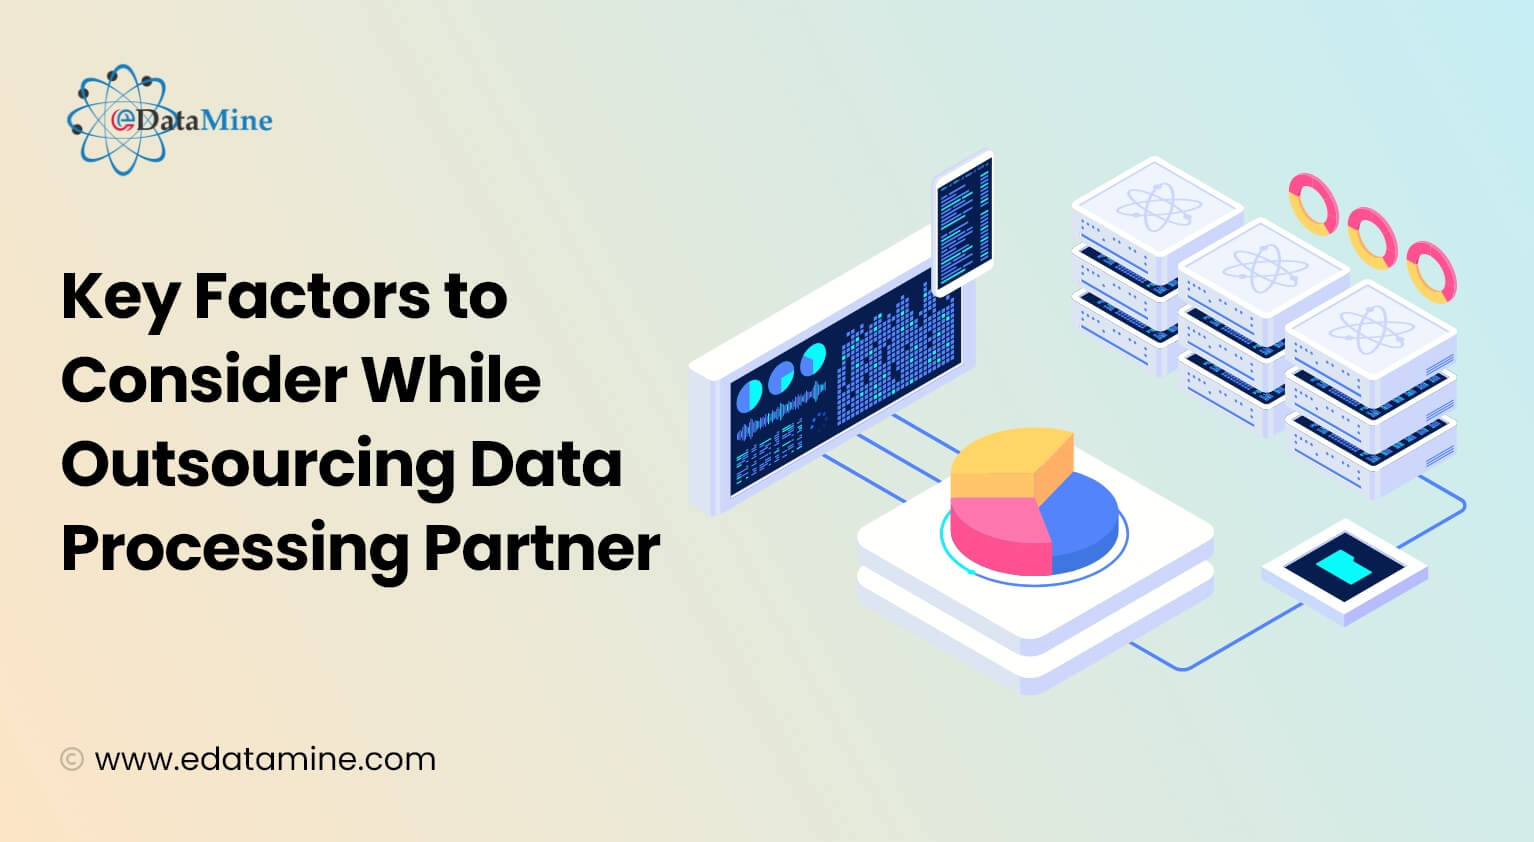 Key Factors to Consider While Outsourcing Data Processing Partner